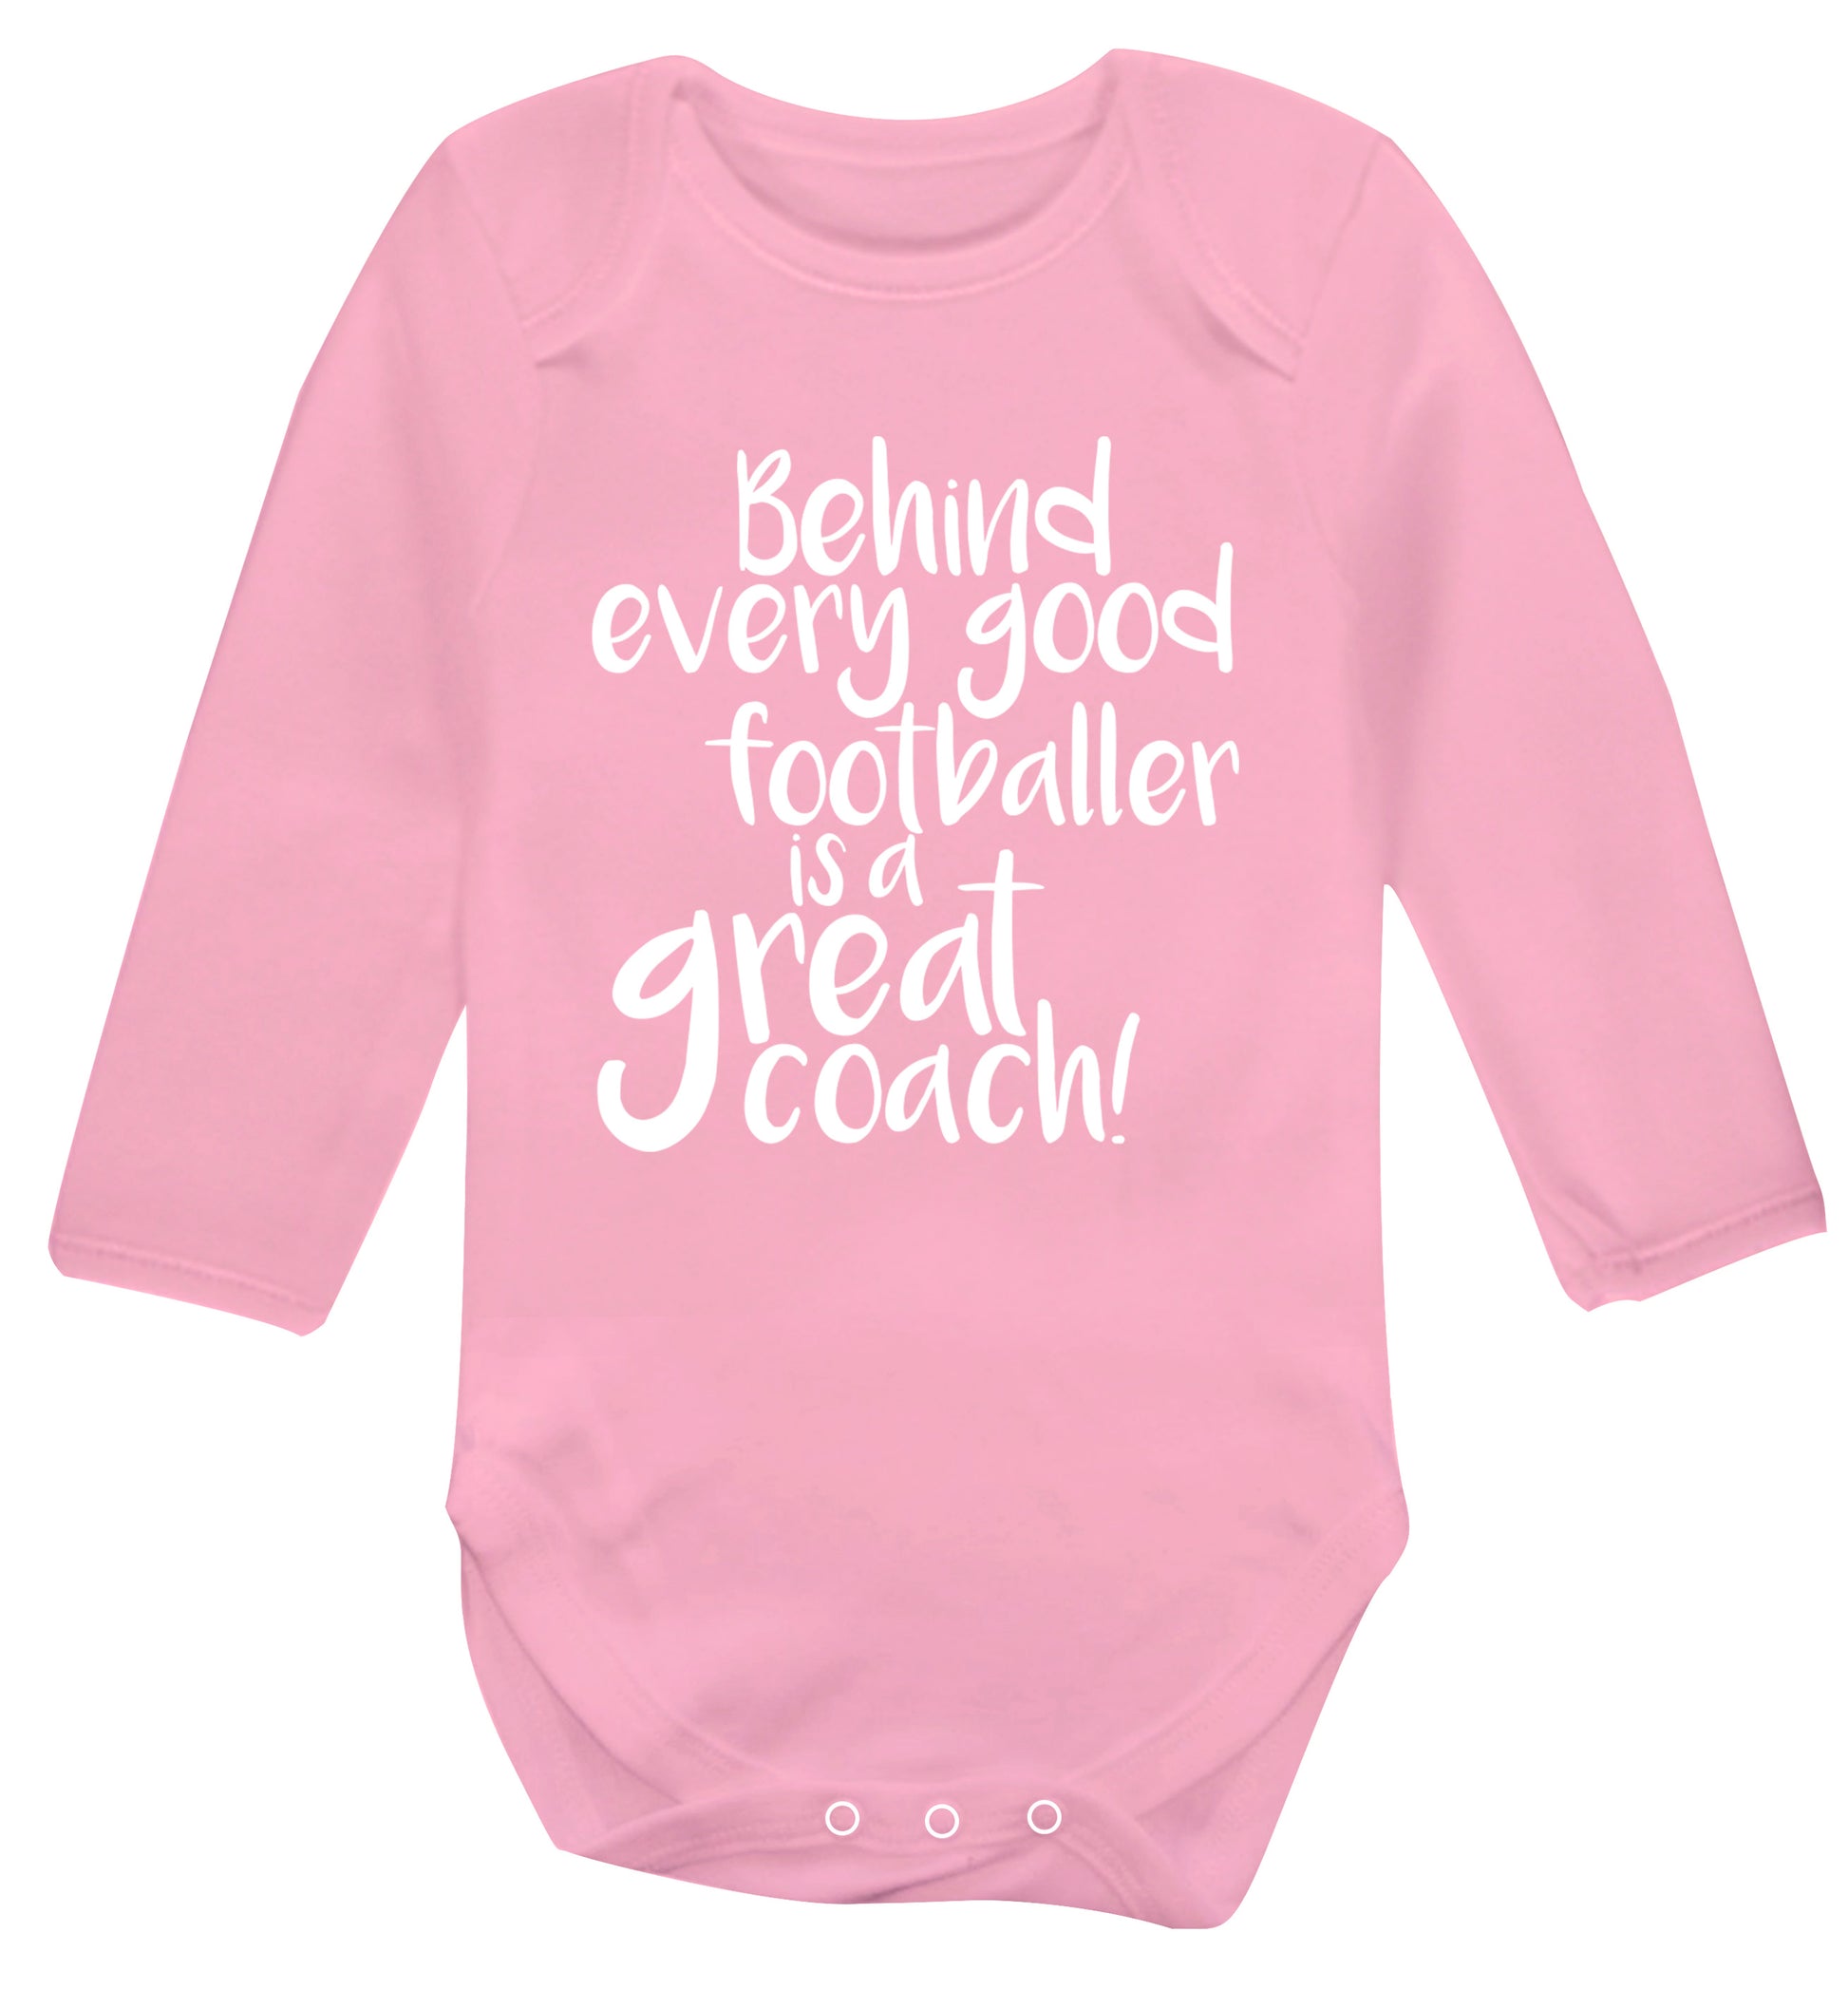 Behind every good footballer is a great coach! Baby Vest long sleeved pale pink 6-12 months